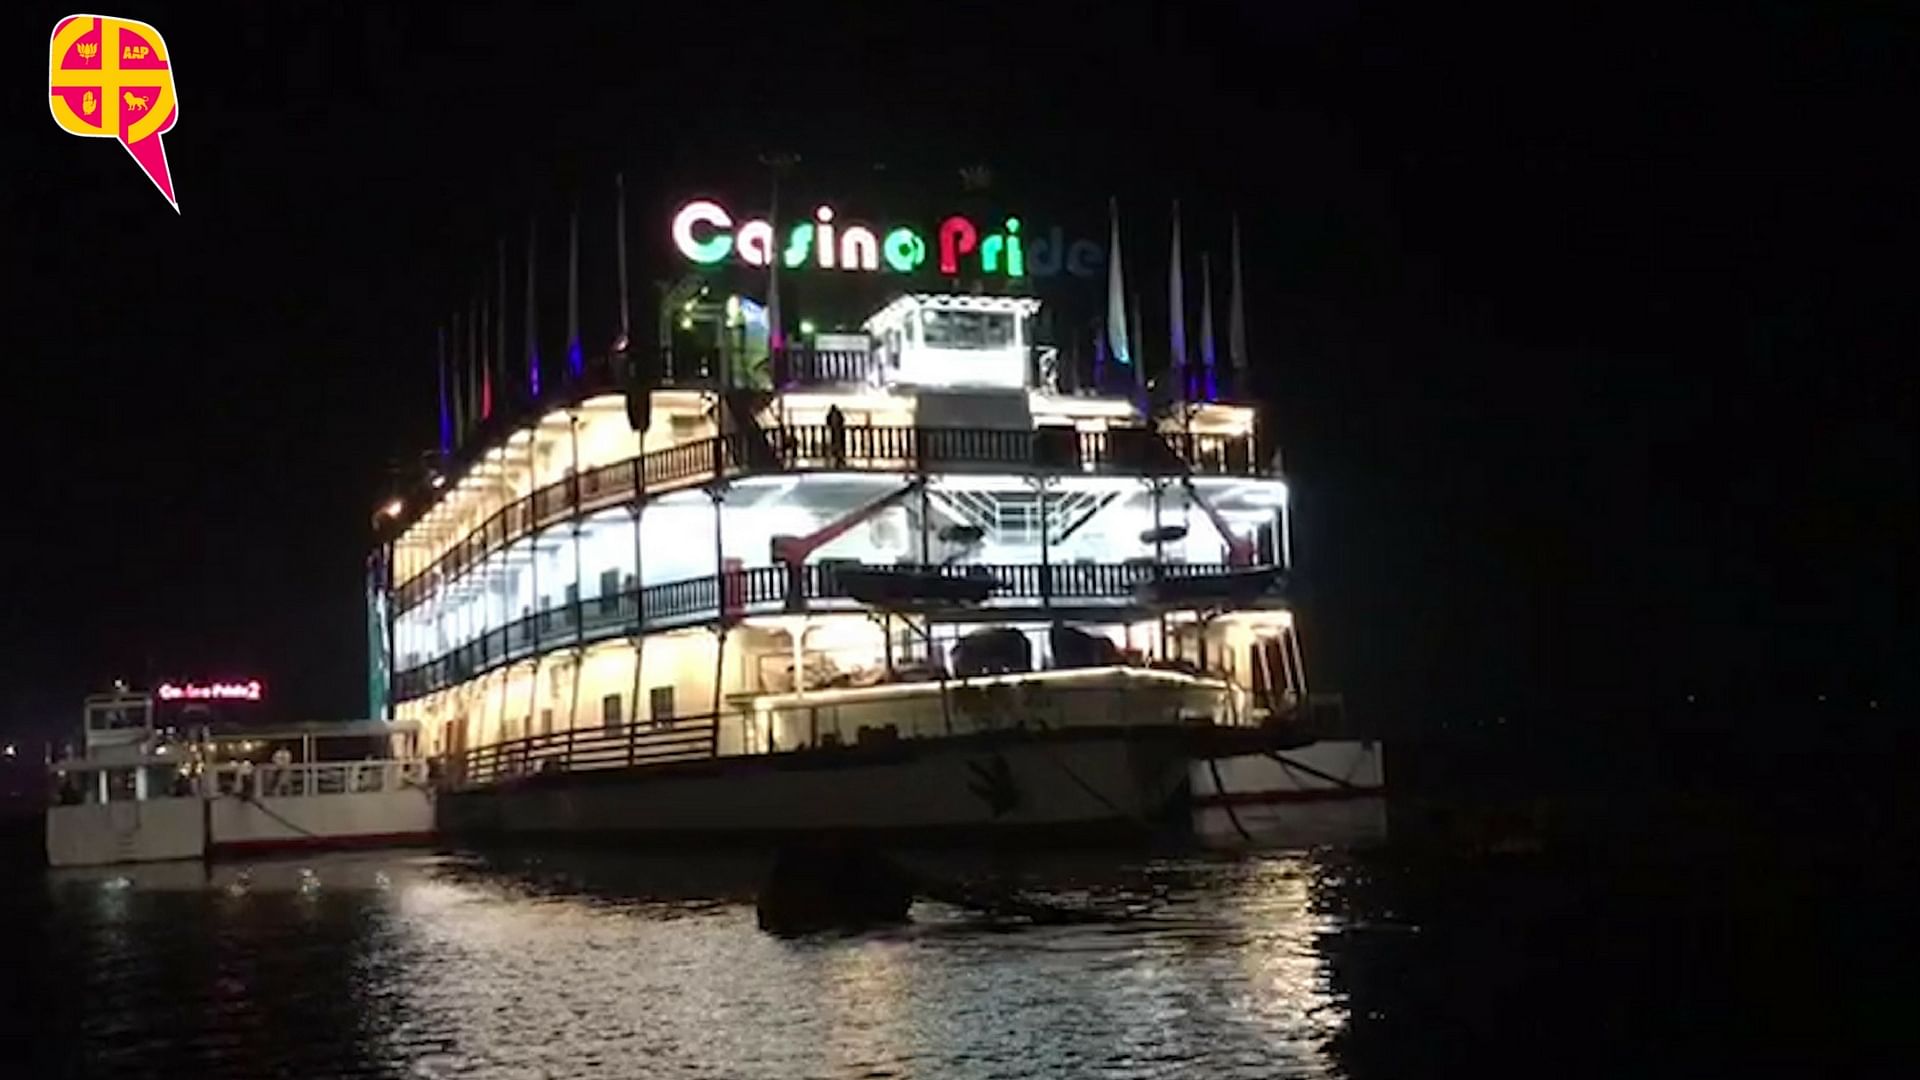 Can political parties dim the lights of casinos in Goa? <b>The Quint</b>’s ground report from a floating casino finds out. (Photo: Ashish Dikshit/<b>The Quint</b>)